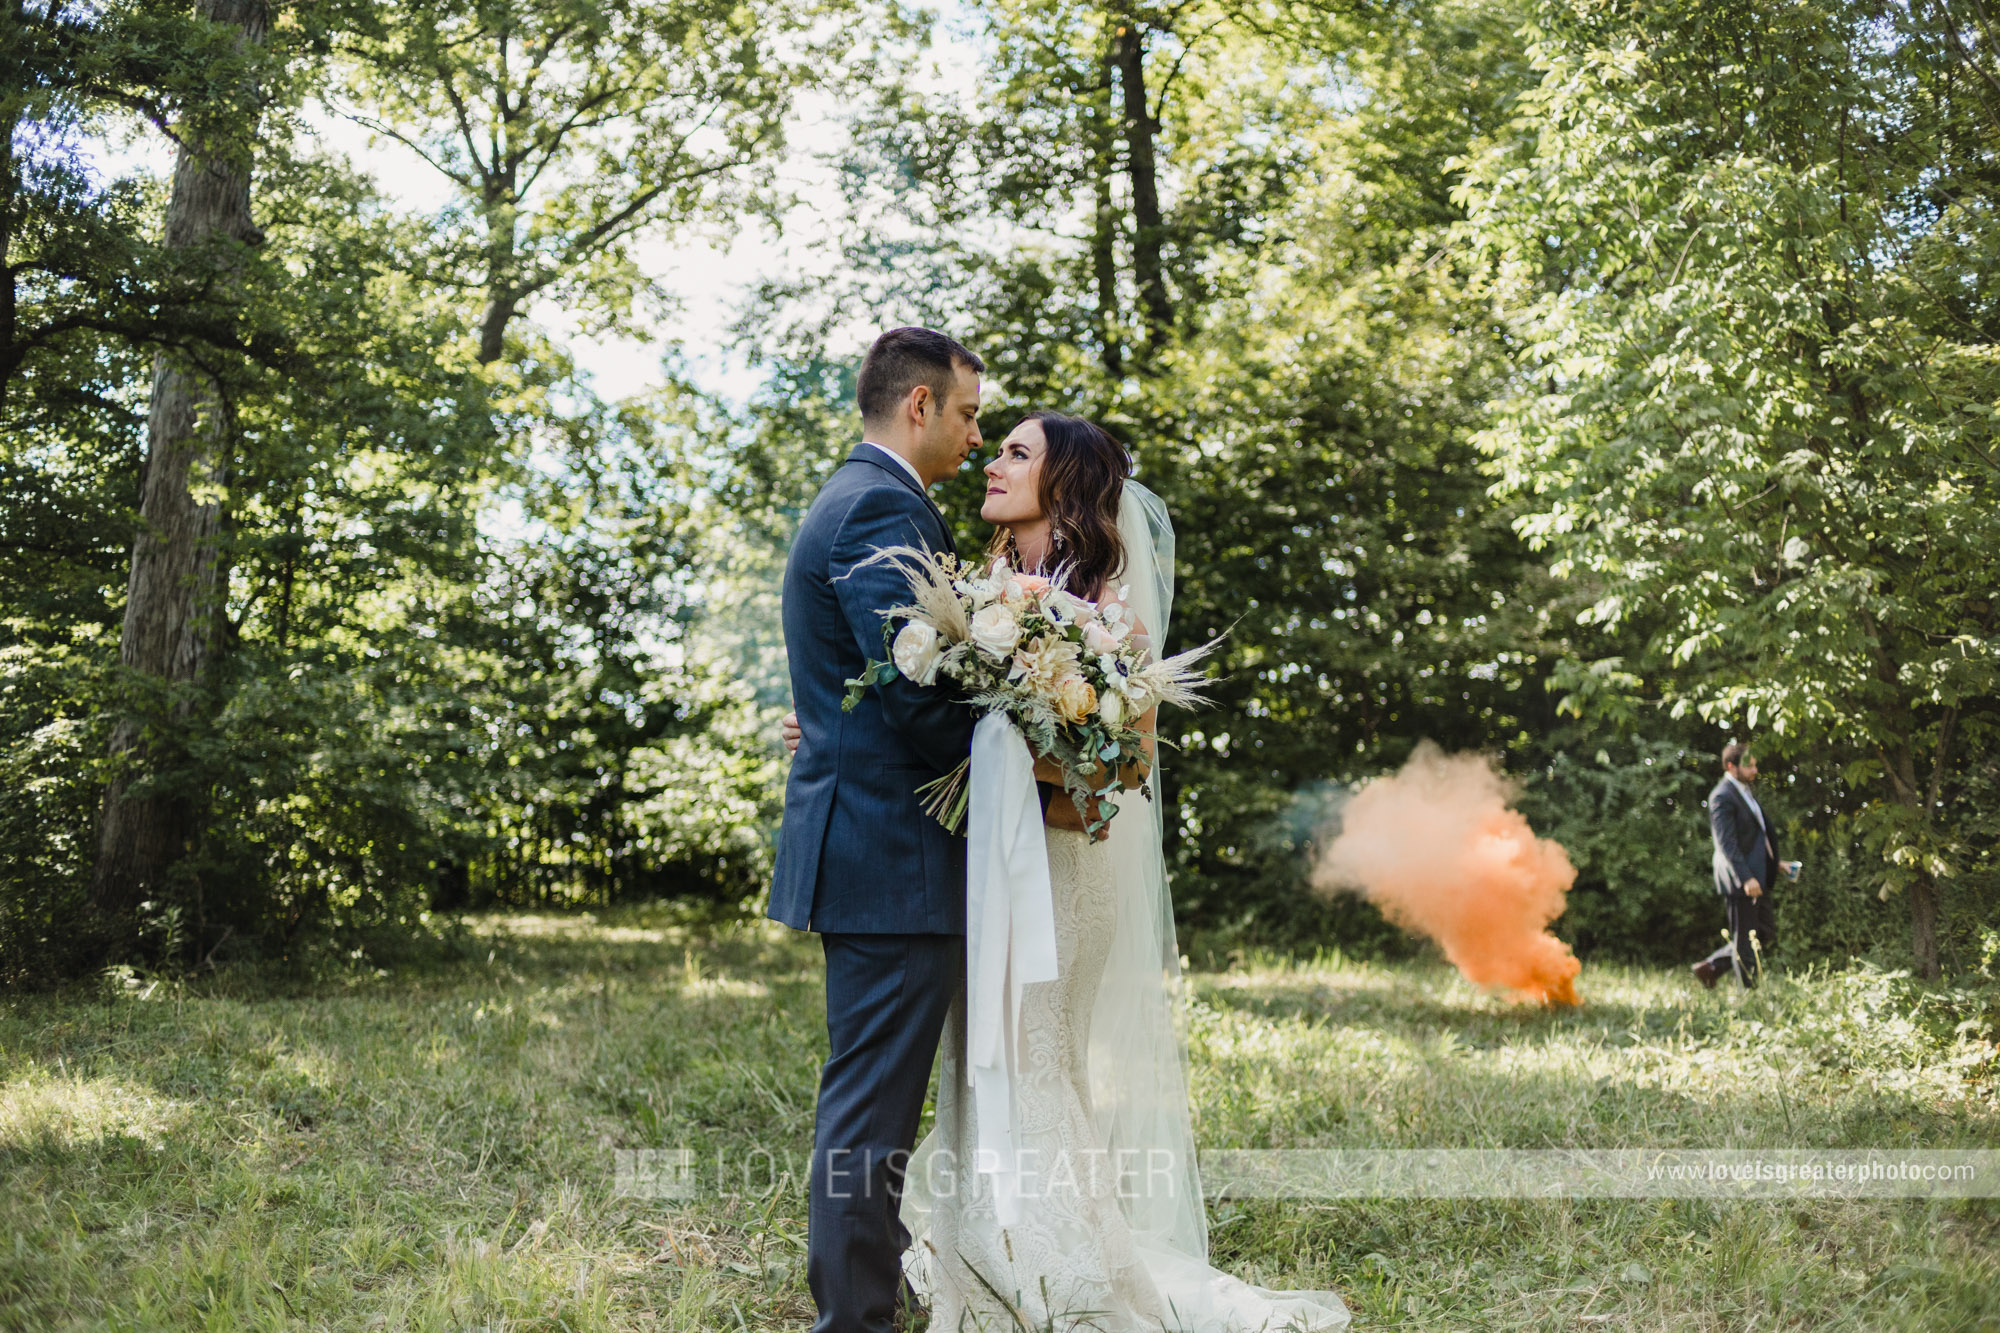 How to Use Smoke Bombs for Wedding Photography - Tips for Amazing Wedd